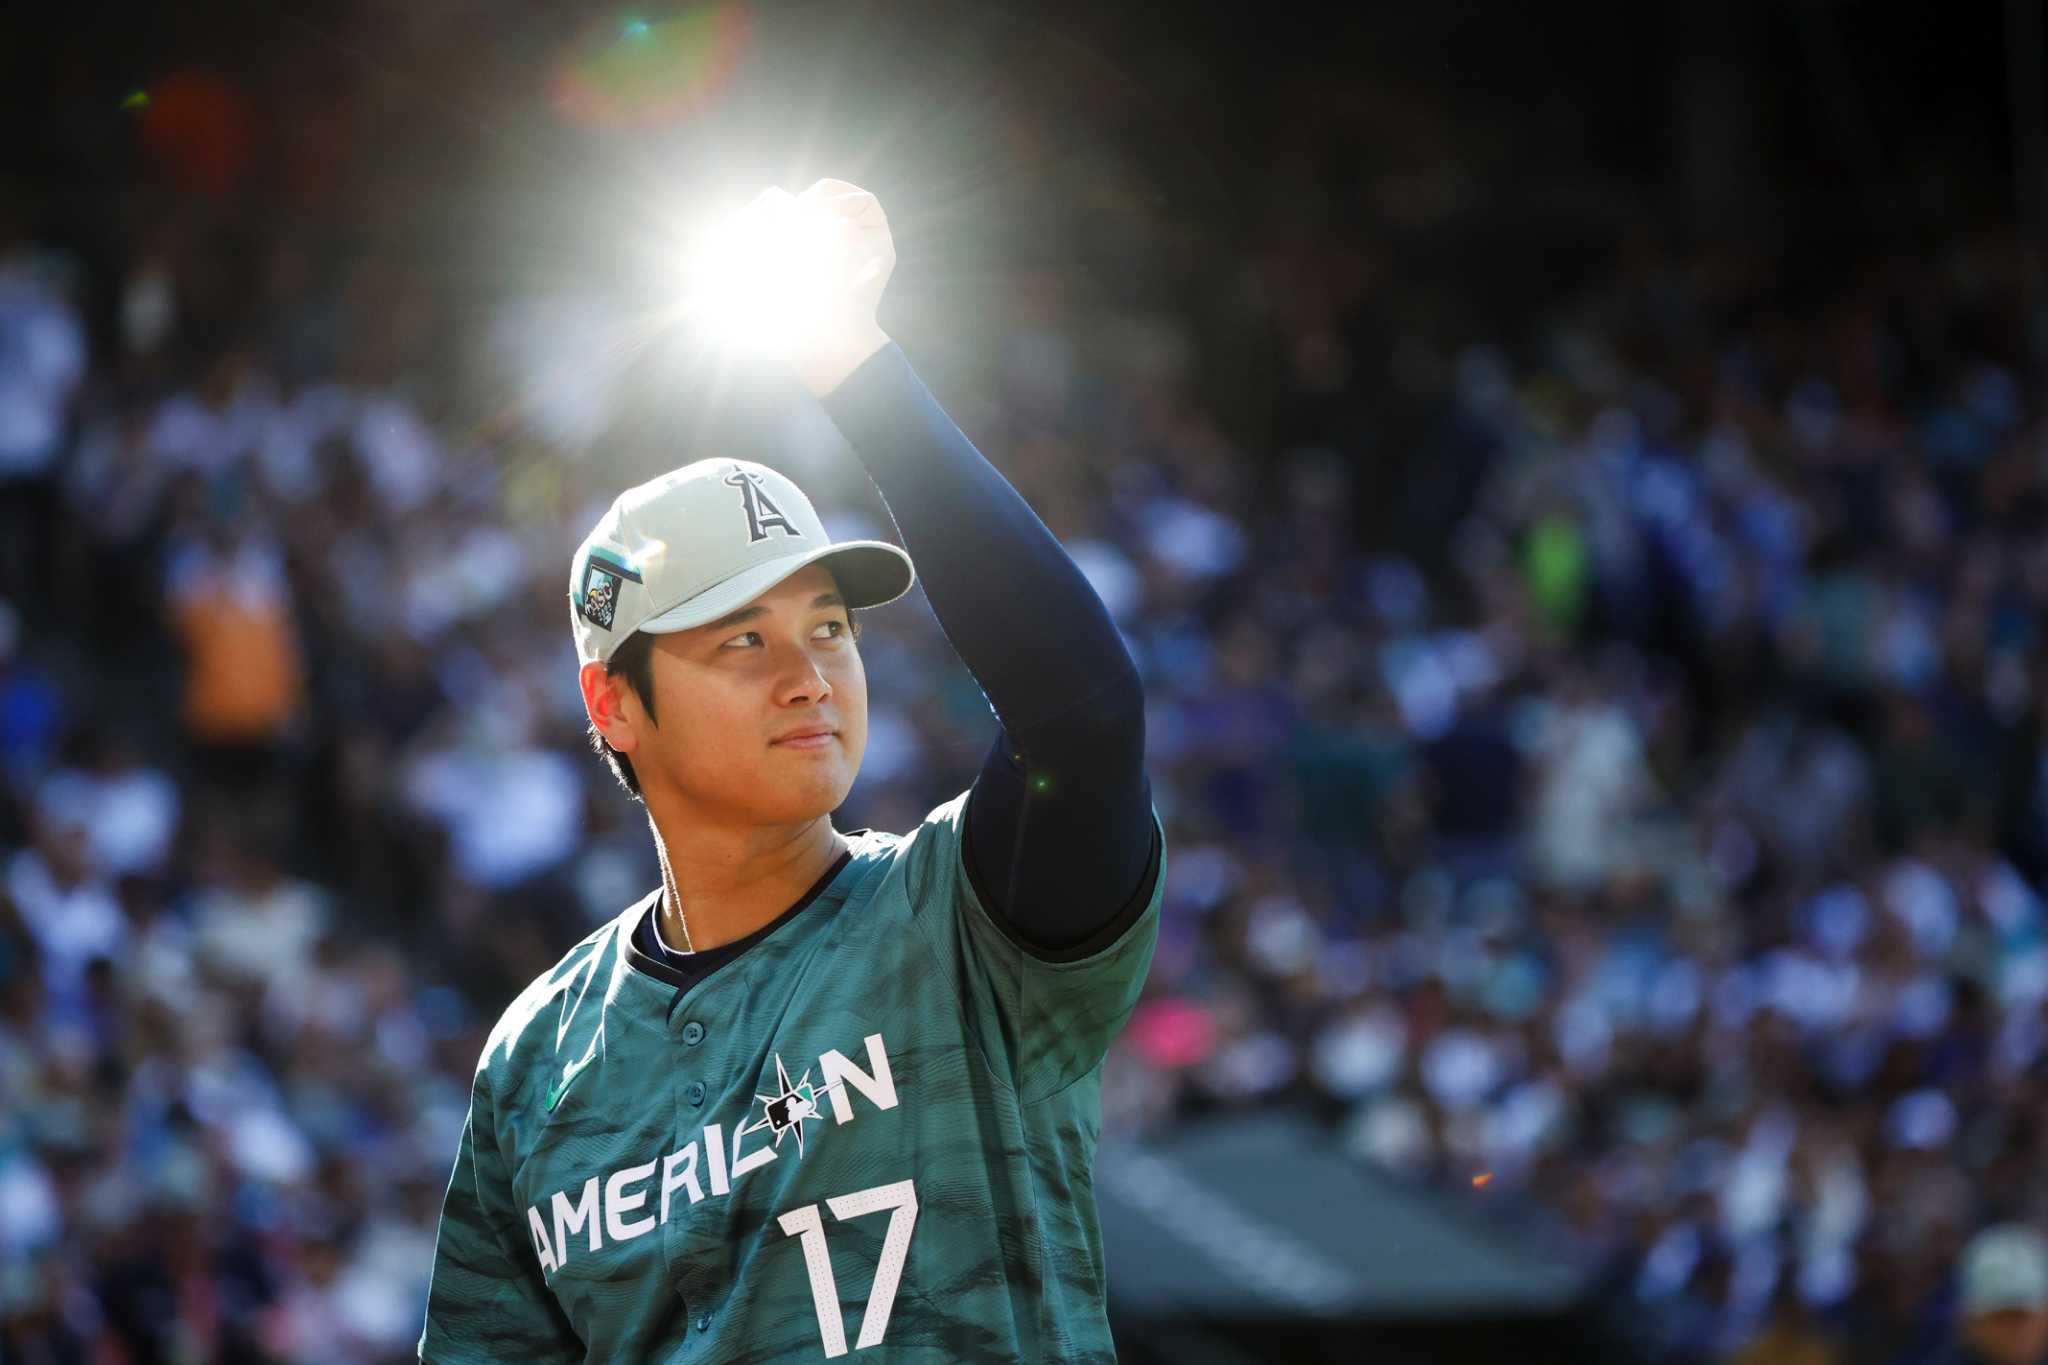 Fuji matches Ohtani in first duel, A's fall short - Athletics Nation